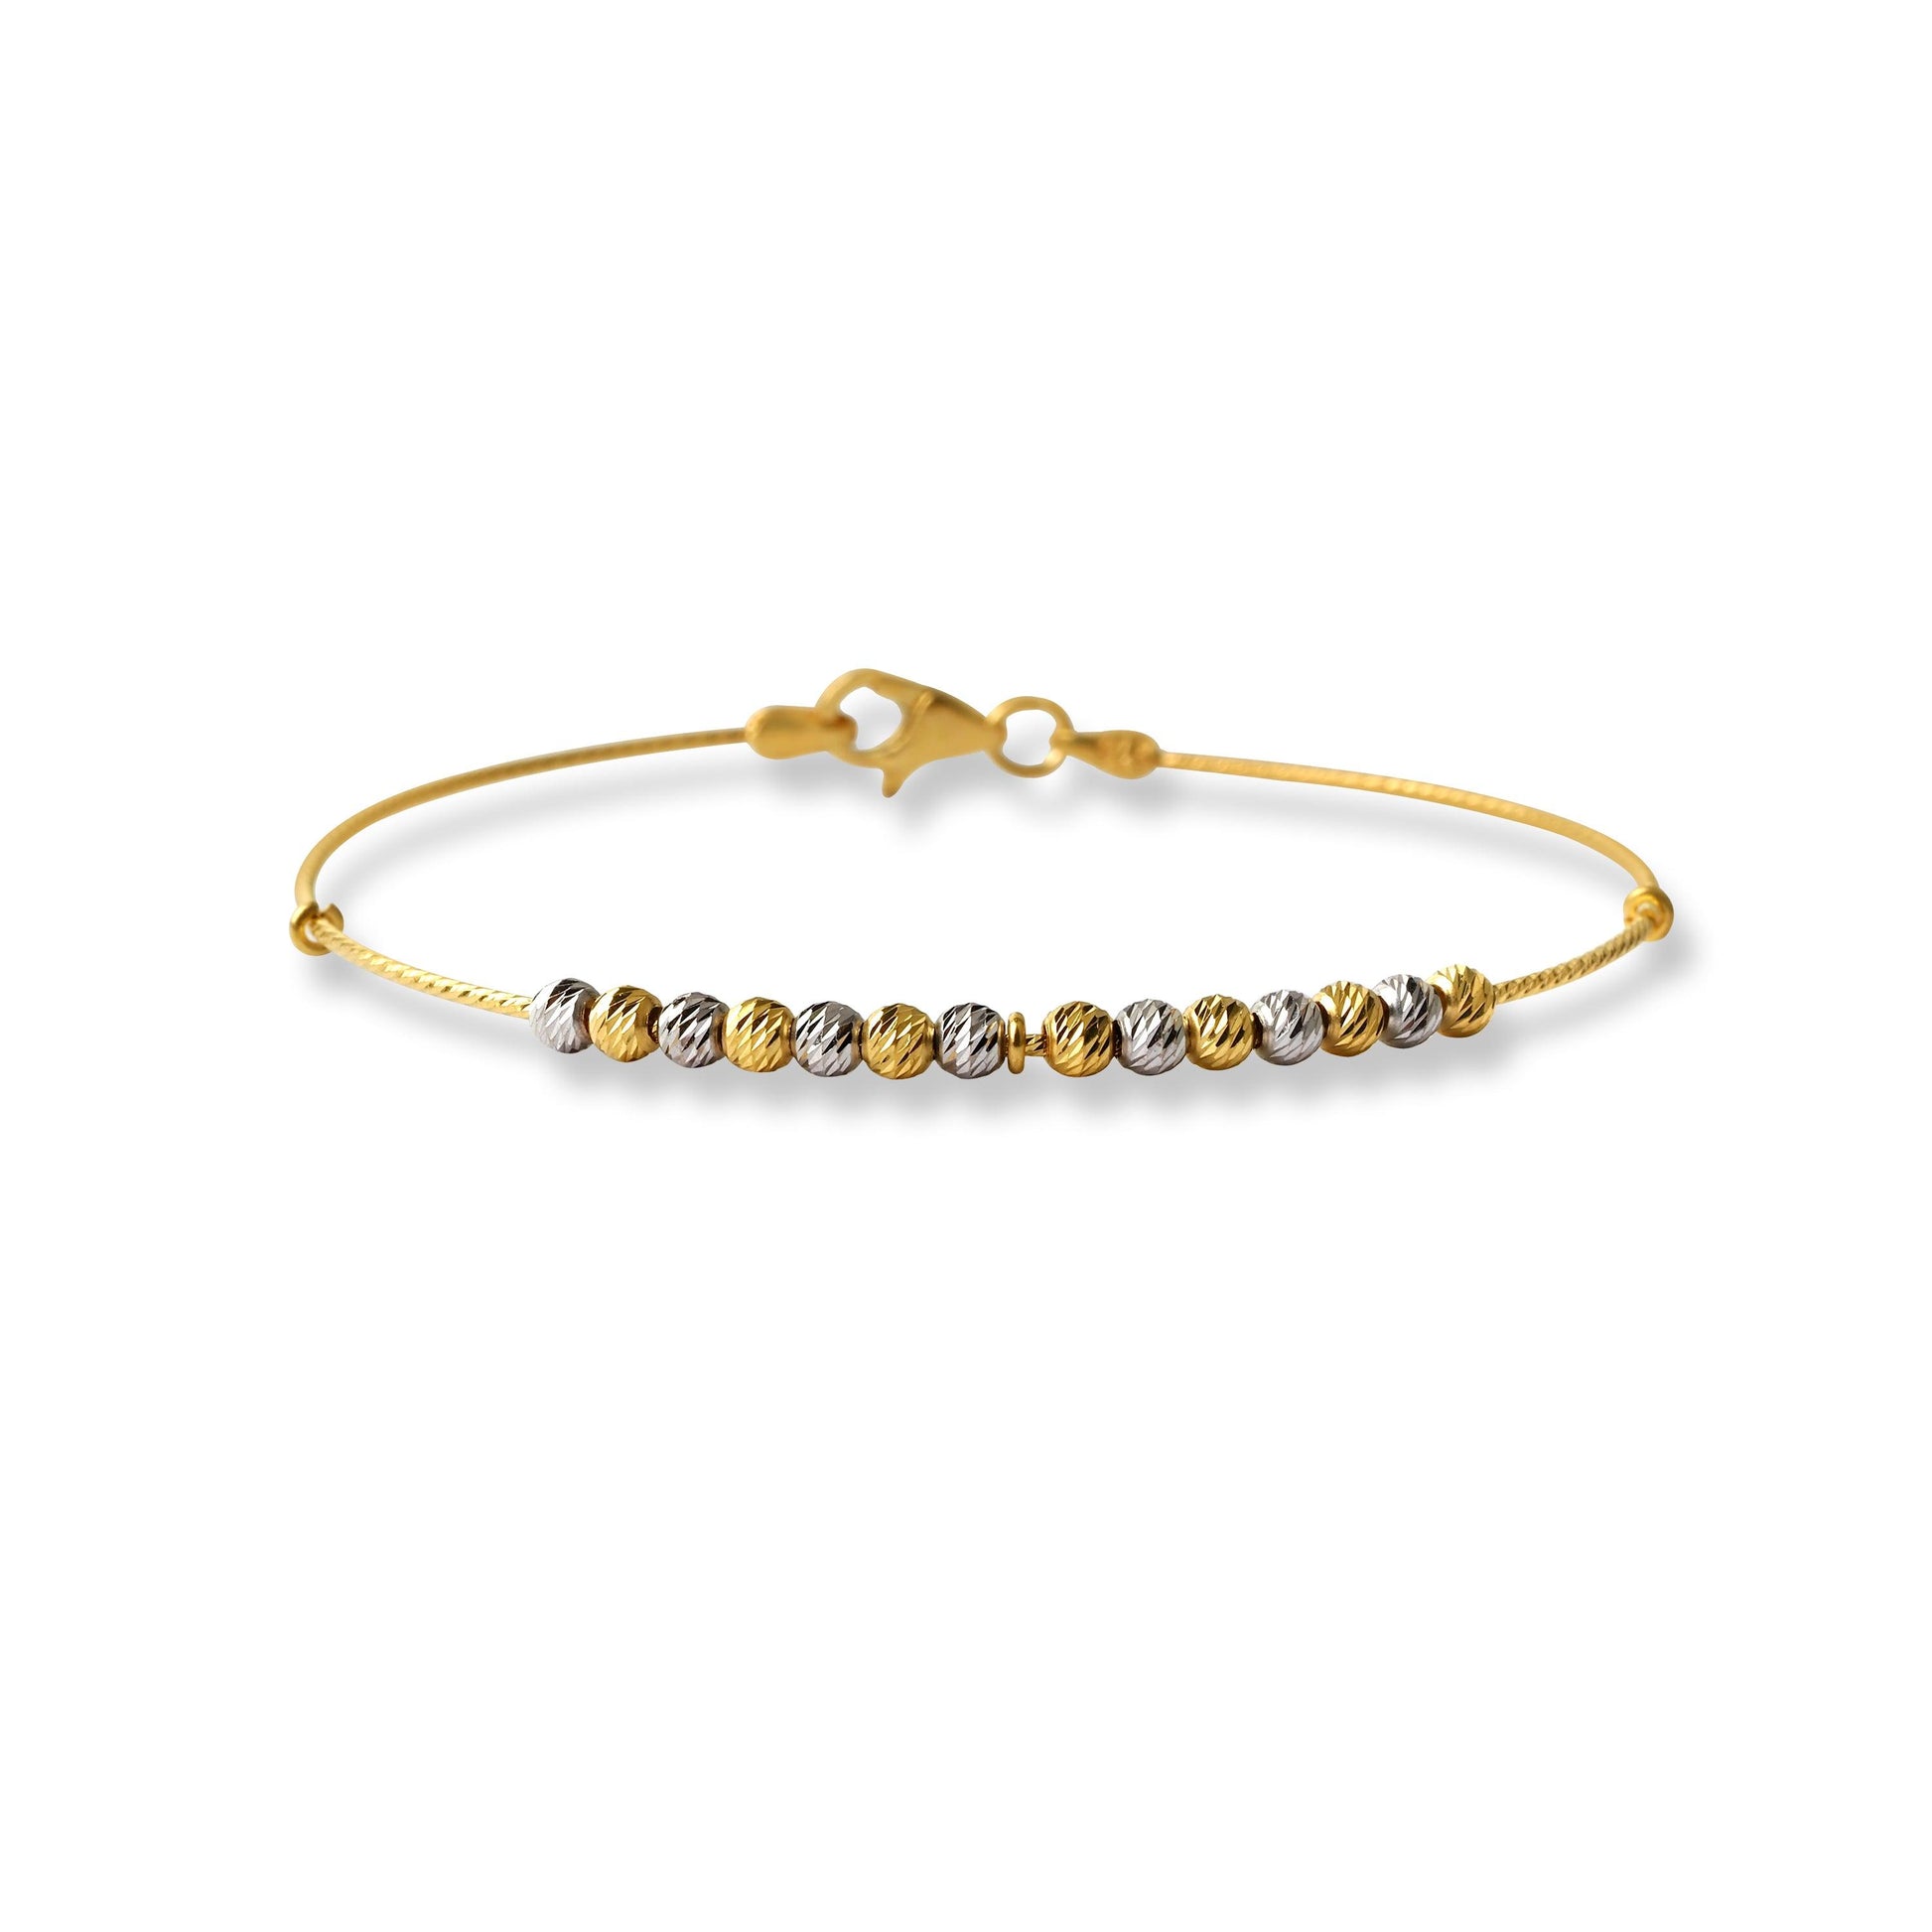 22ct Gold Rhodium Plated Beads Bangle With Rounded Trigger Clasp (4.0g) B-8516 - Minar Jewellers